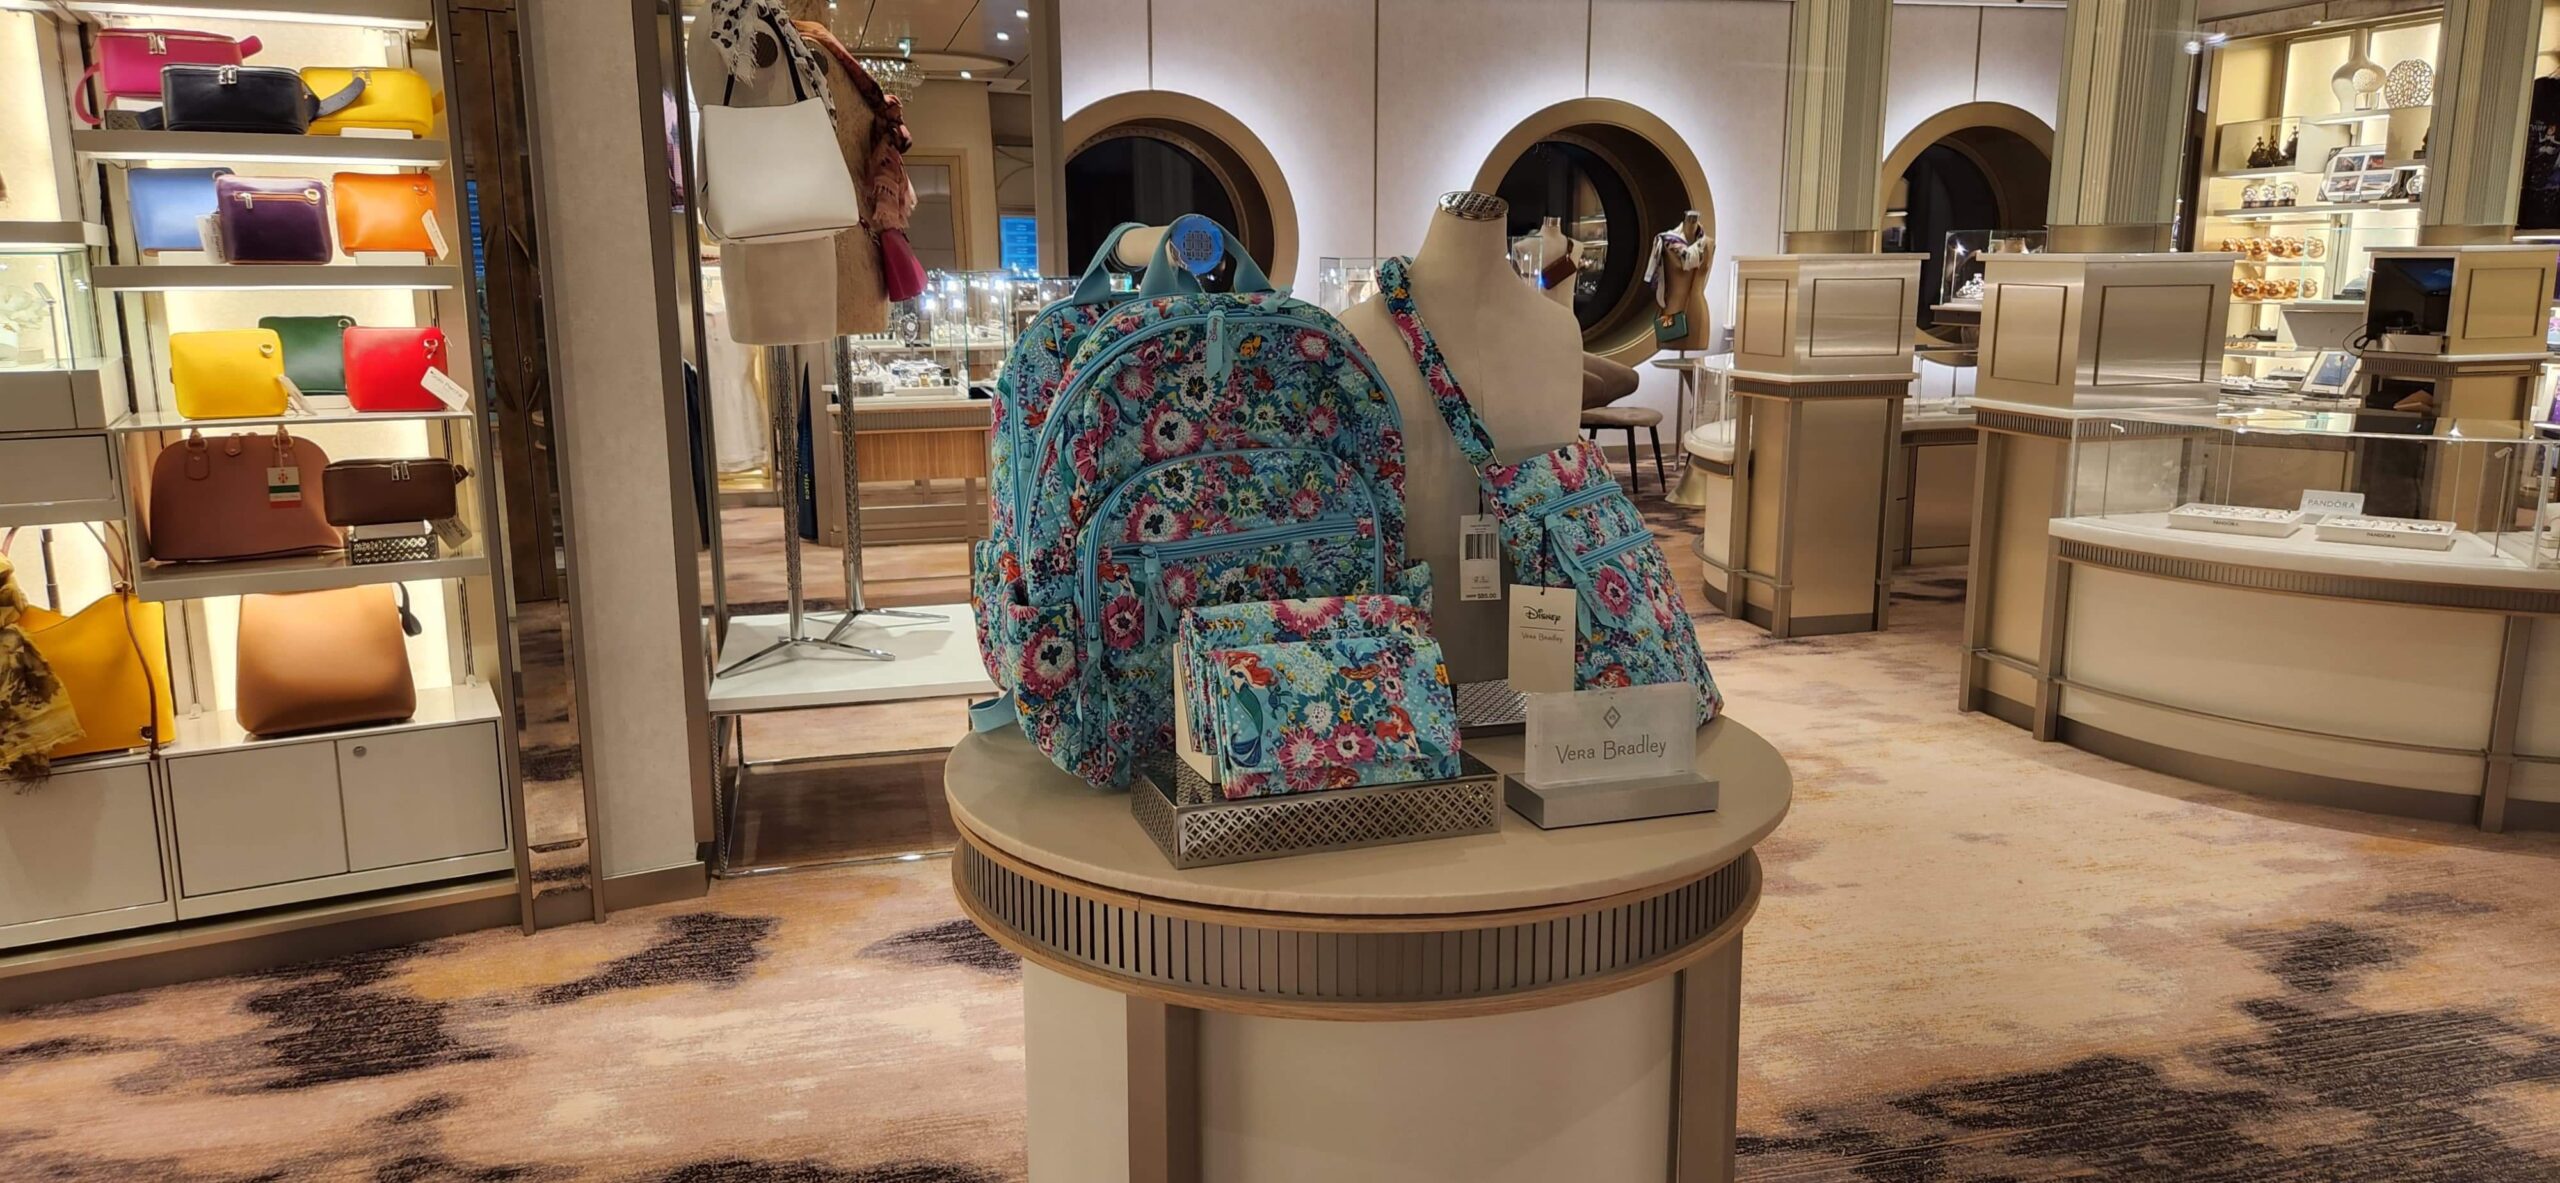 All The New Disney Backpacks And Bags Available On The Disney Wish!